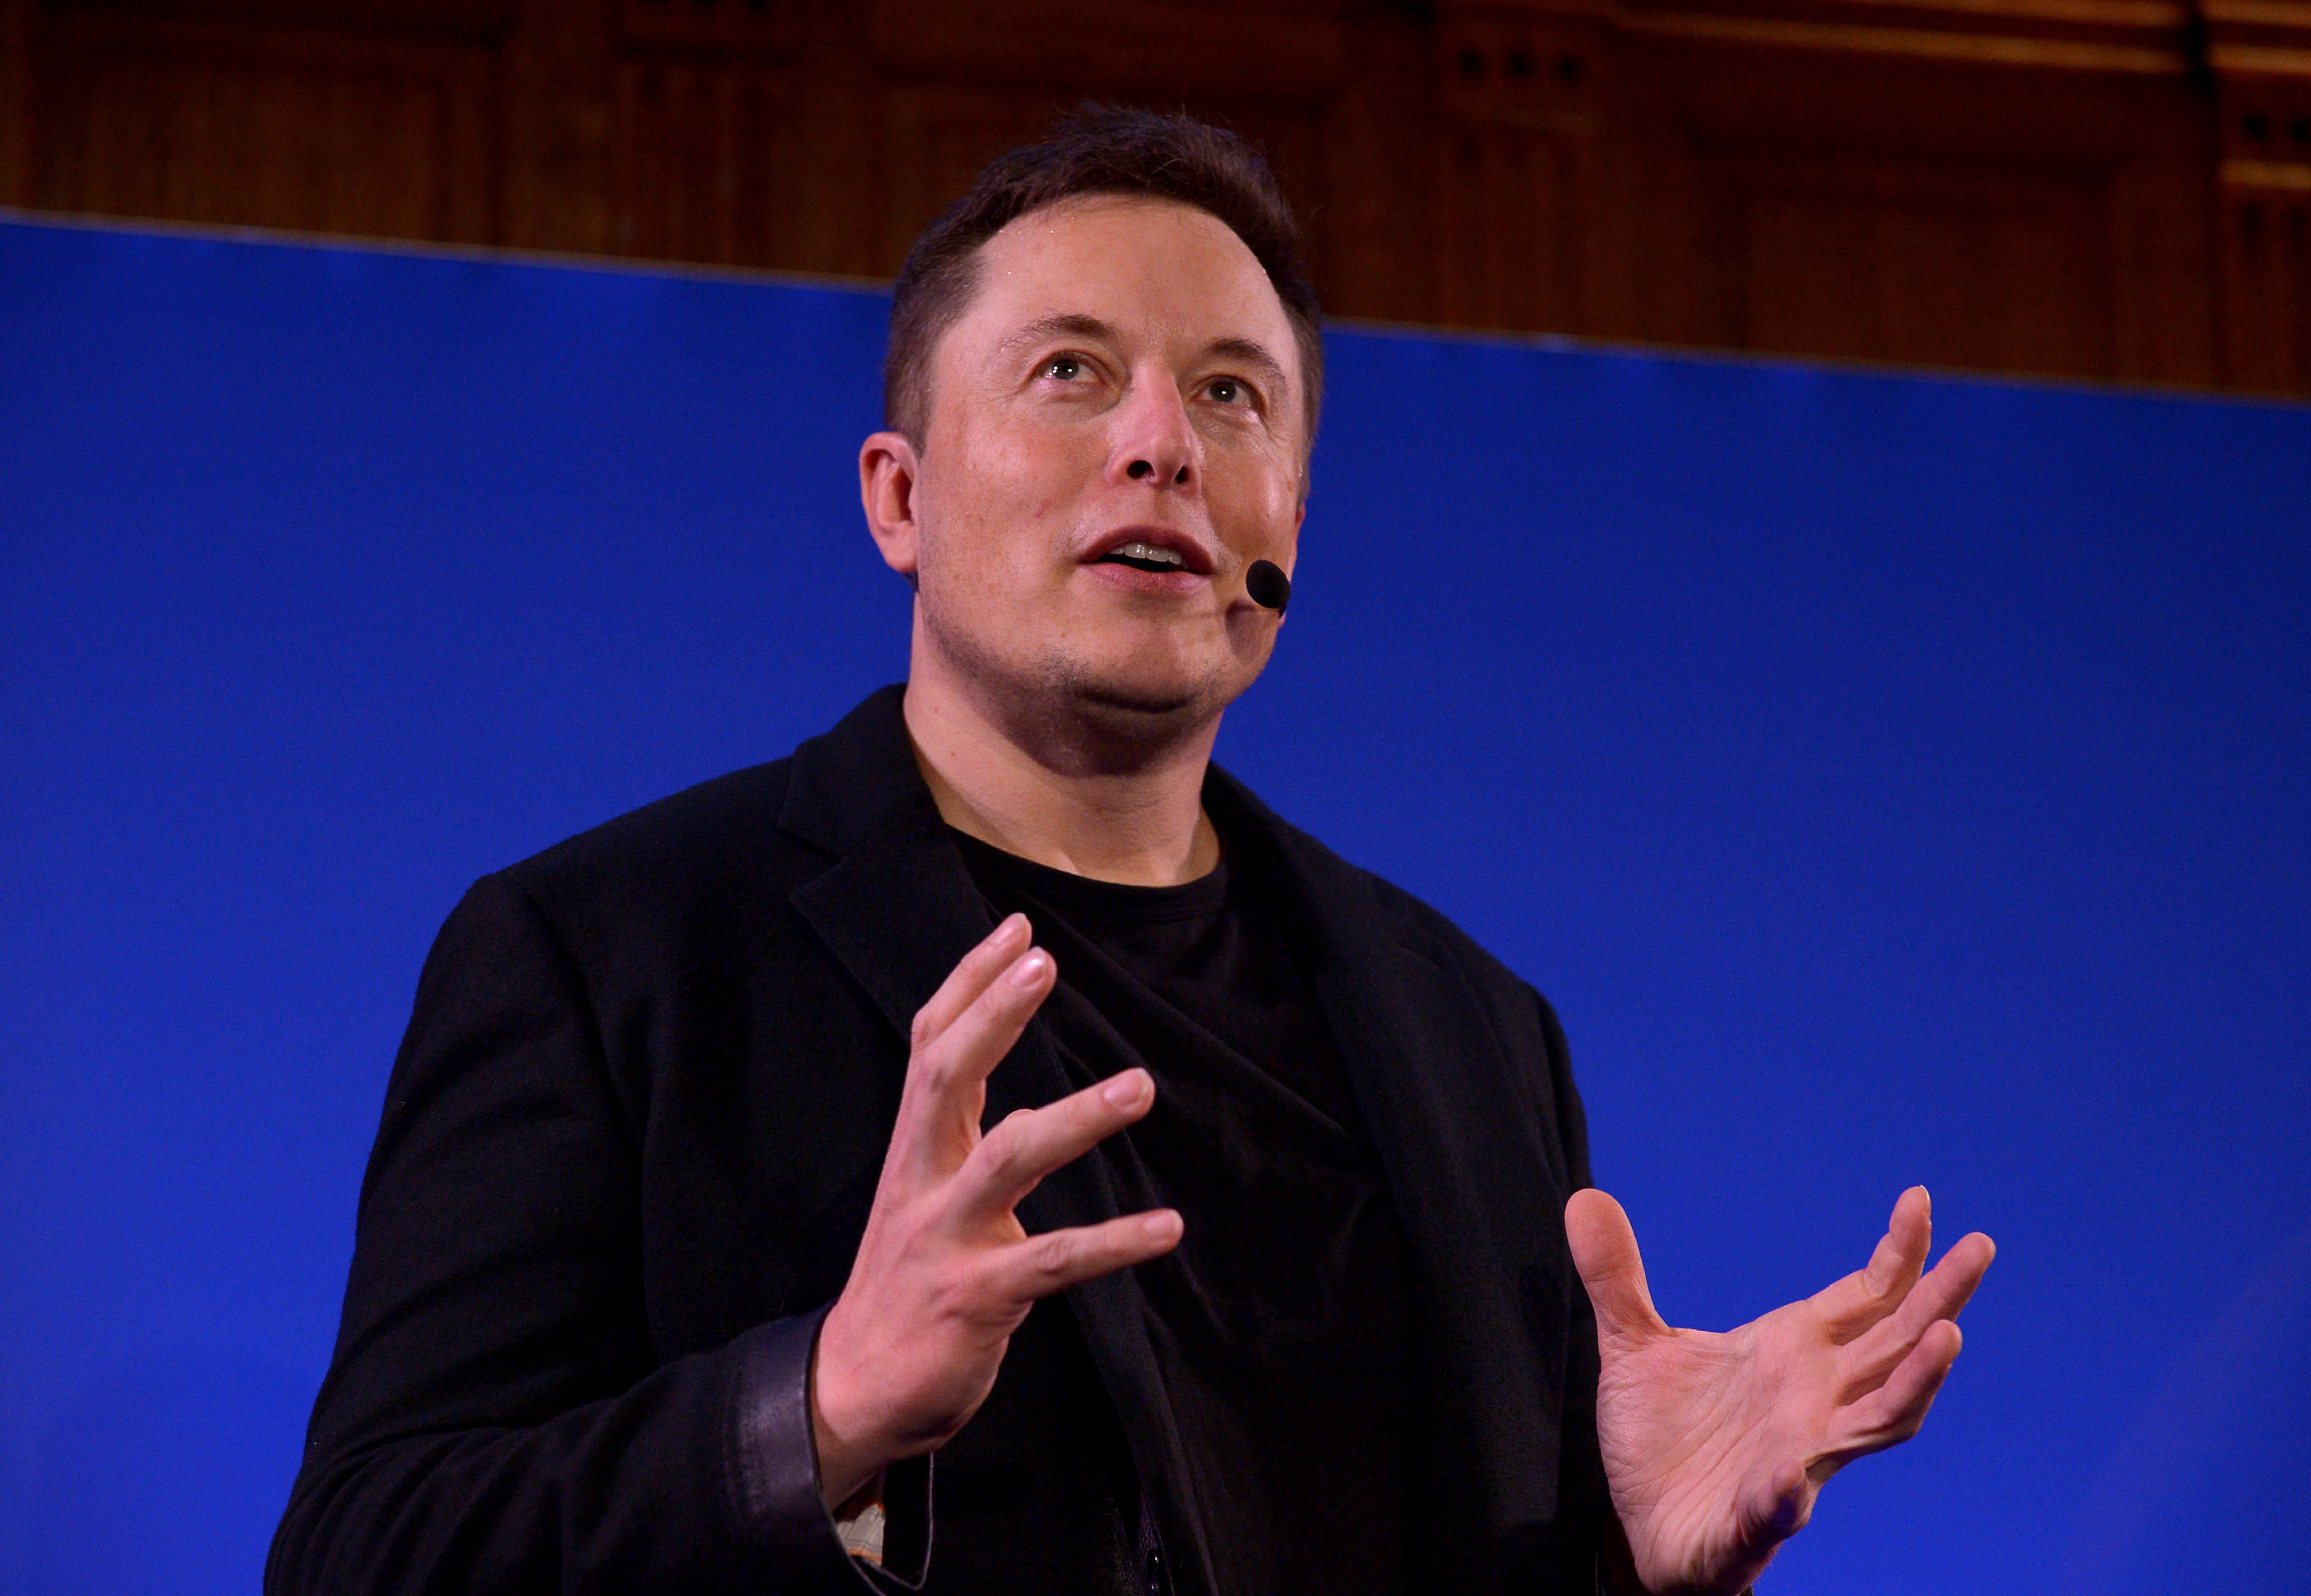 Elon Musk: Robots will take your jobs, government will have to pay your wage